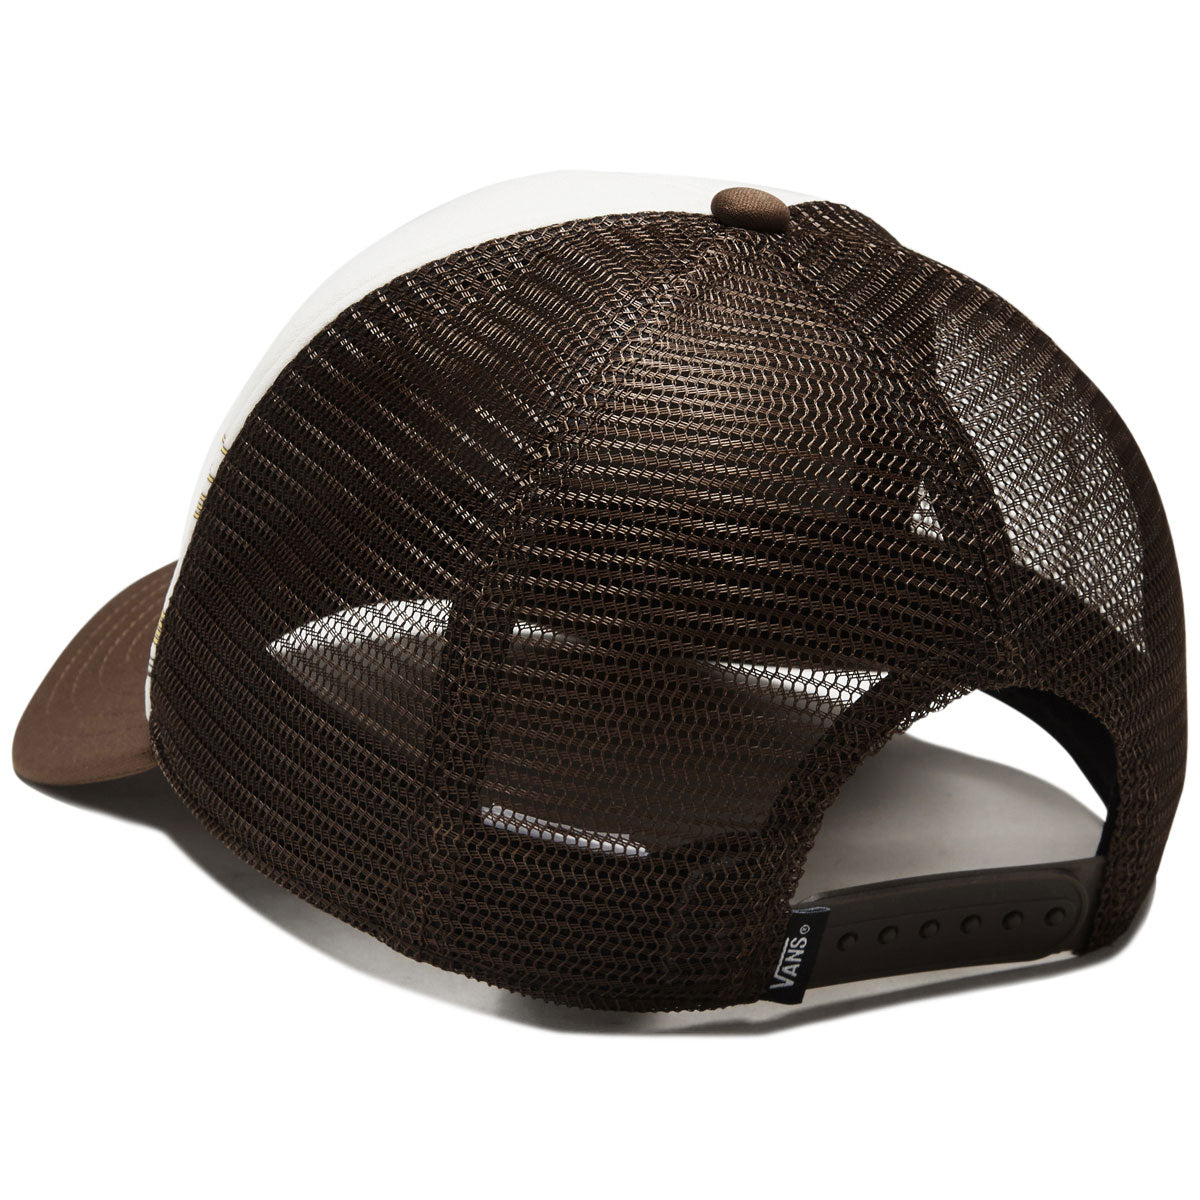 Vans Classic Curved Bill Trucker Hat - Sepia image 2